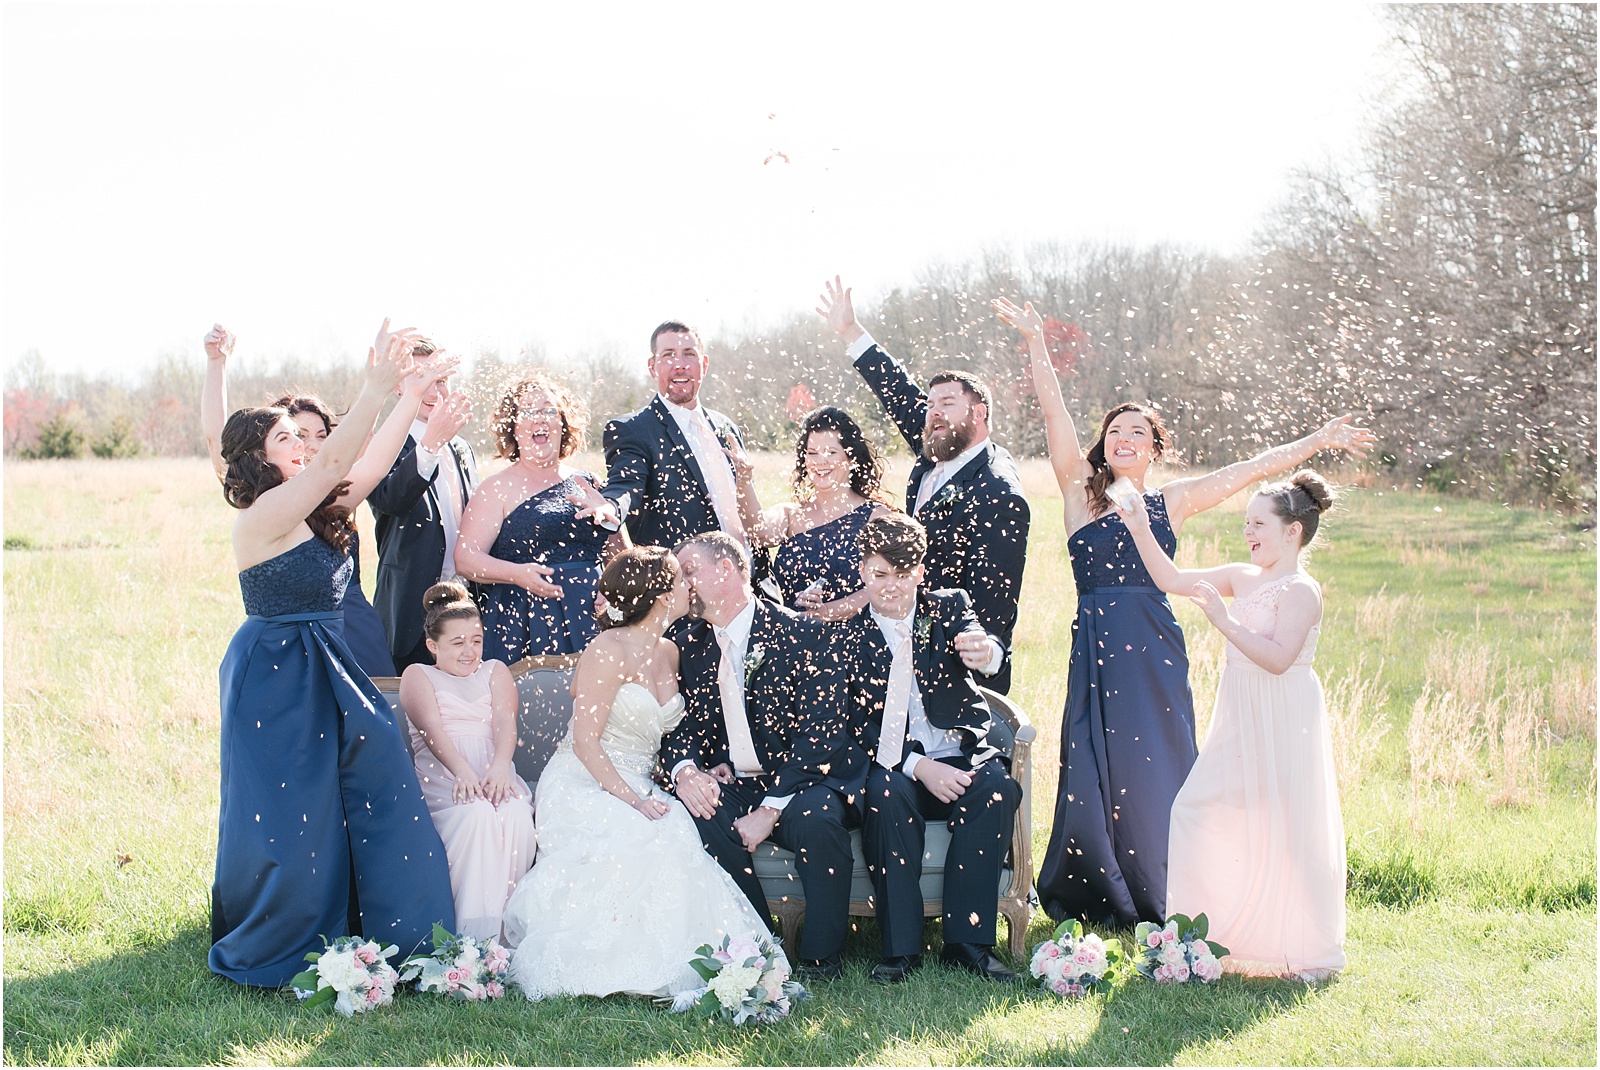 A Country Chic Starlight Meadows Wedding, Burlington NC, Outdoor wedding, blush wedding bouquet, vintage couch, gray vintage couch, bridal party photographs, bridal party, navy blue bridal party